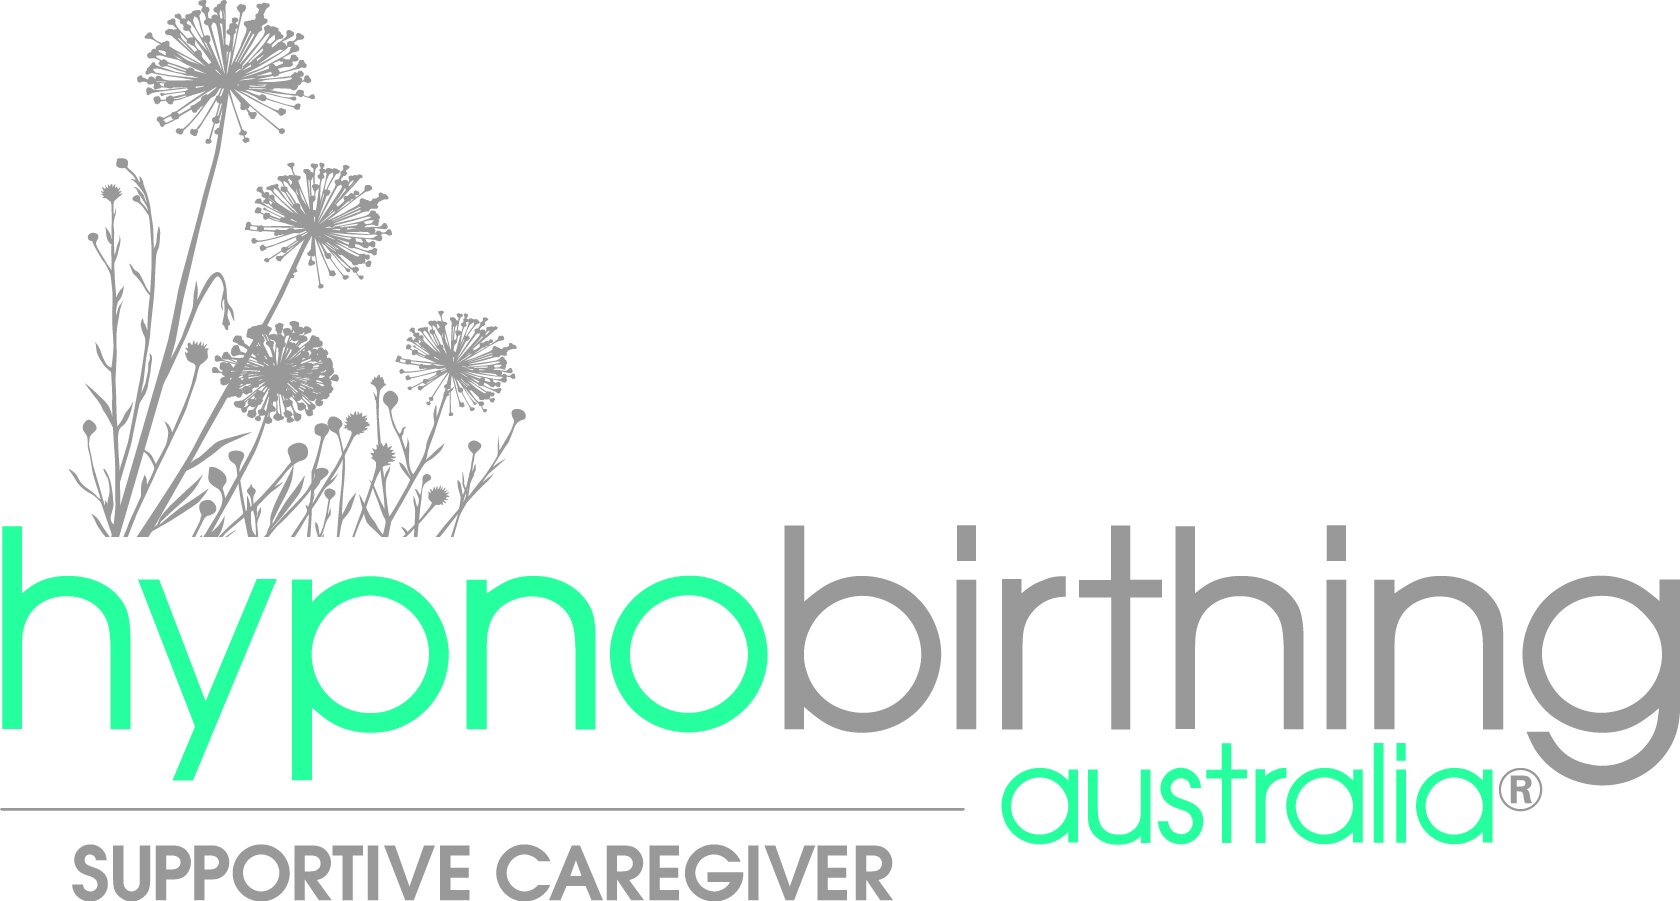 Nomad Chiropractic is Hypnobirthing trained